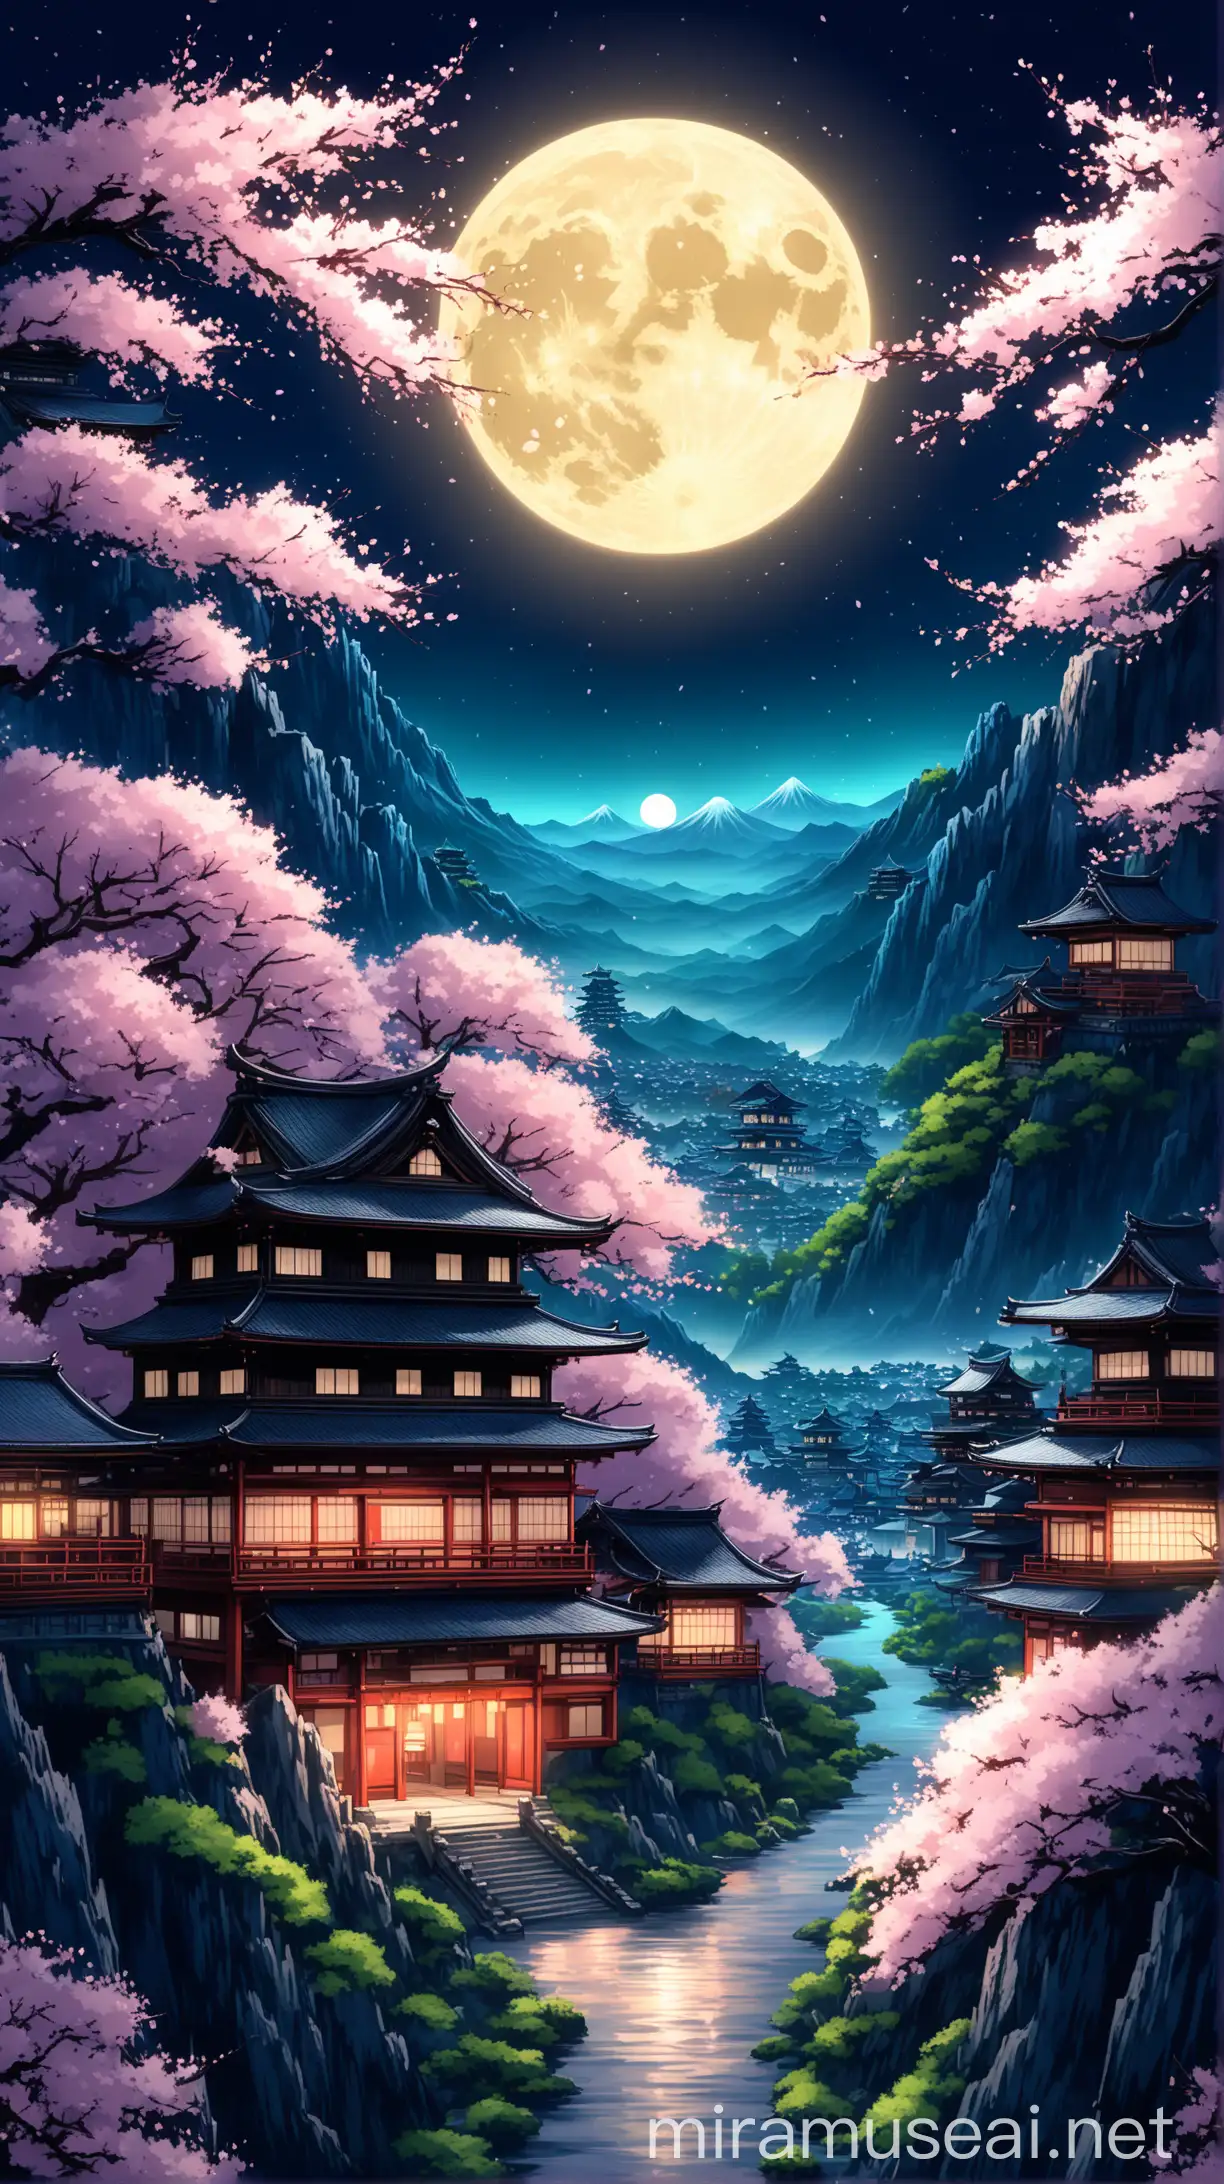 Japanese Fantasy Landscape Moonlit Cherry Blossoms and Traditional Architecture